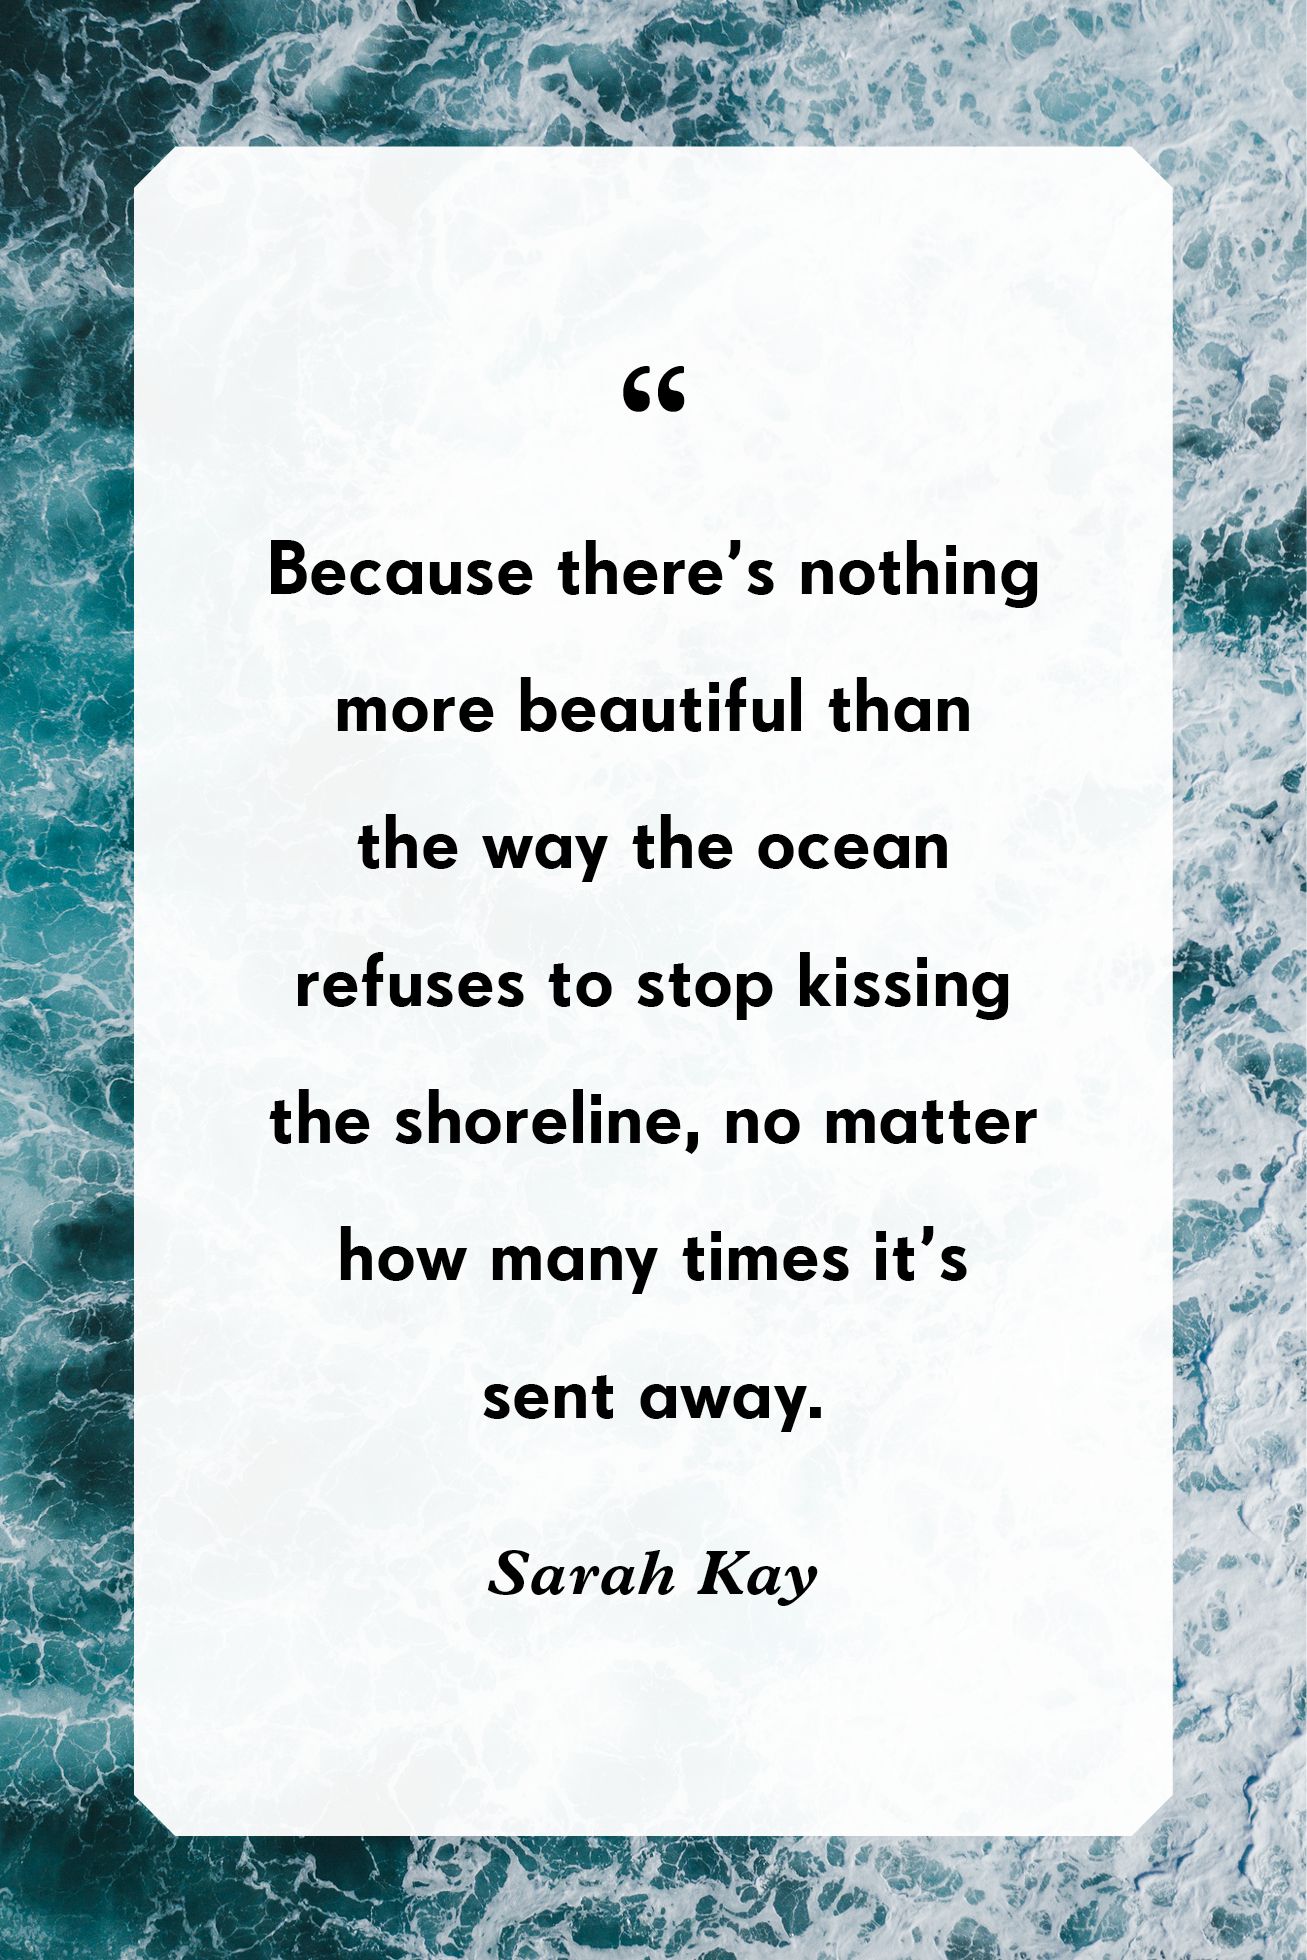 compairing oceans with love sayings